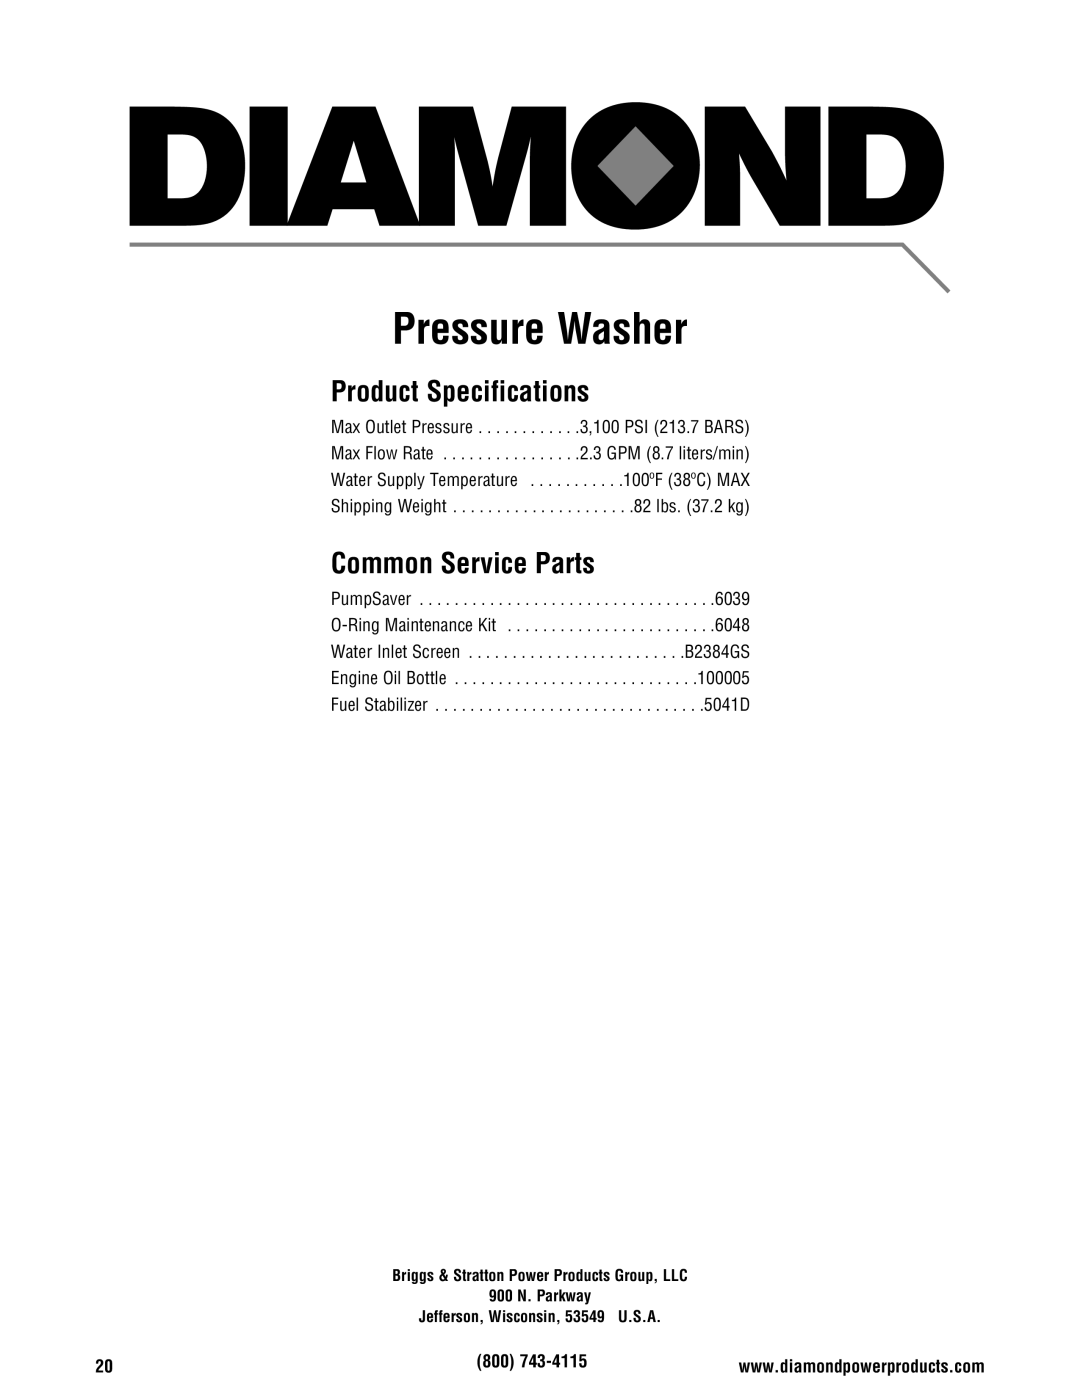 Diamond Power Products 3100 Psi manual Pressure Washer, Product Specifications, Common Service Parts 